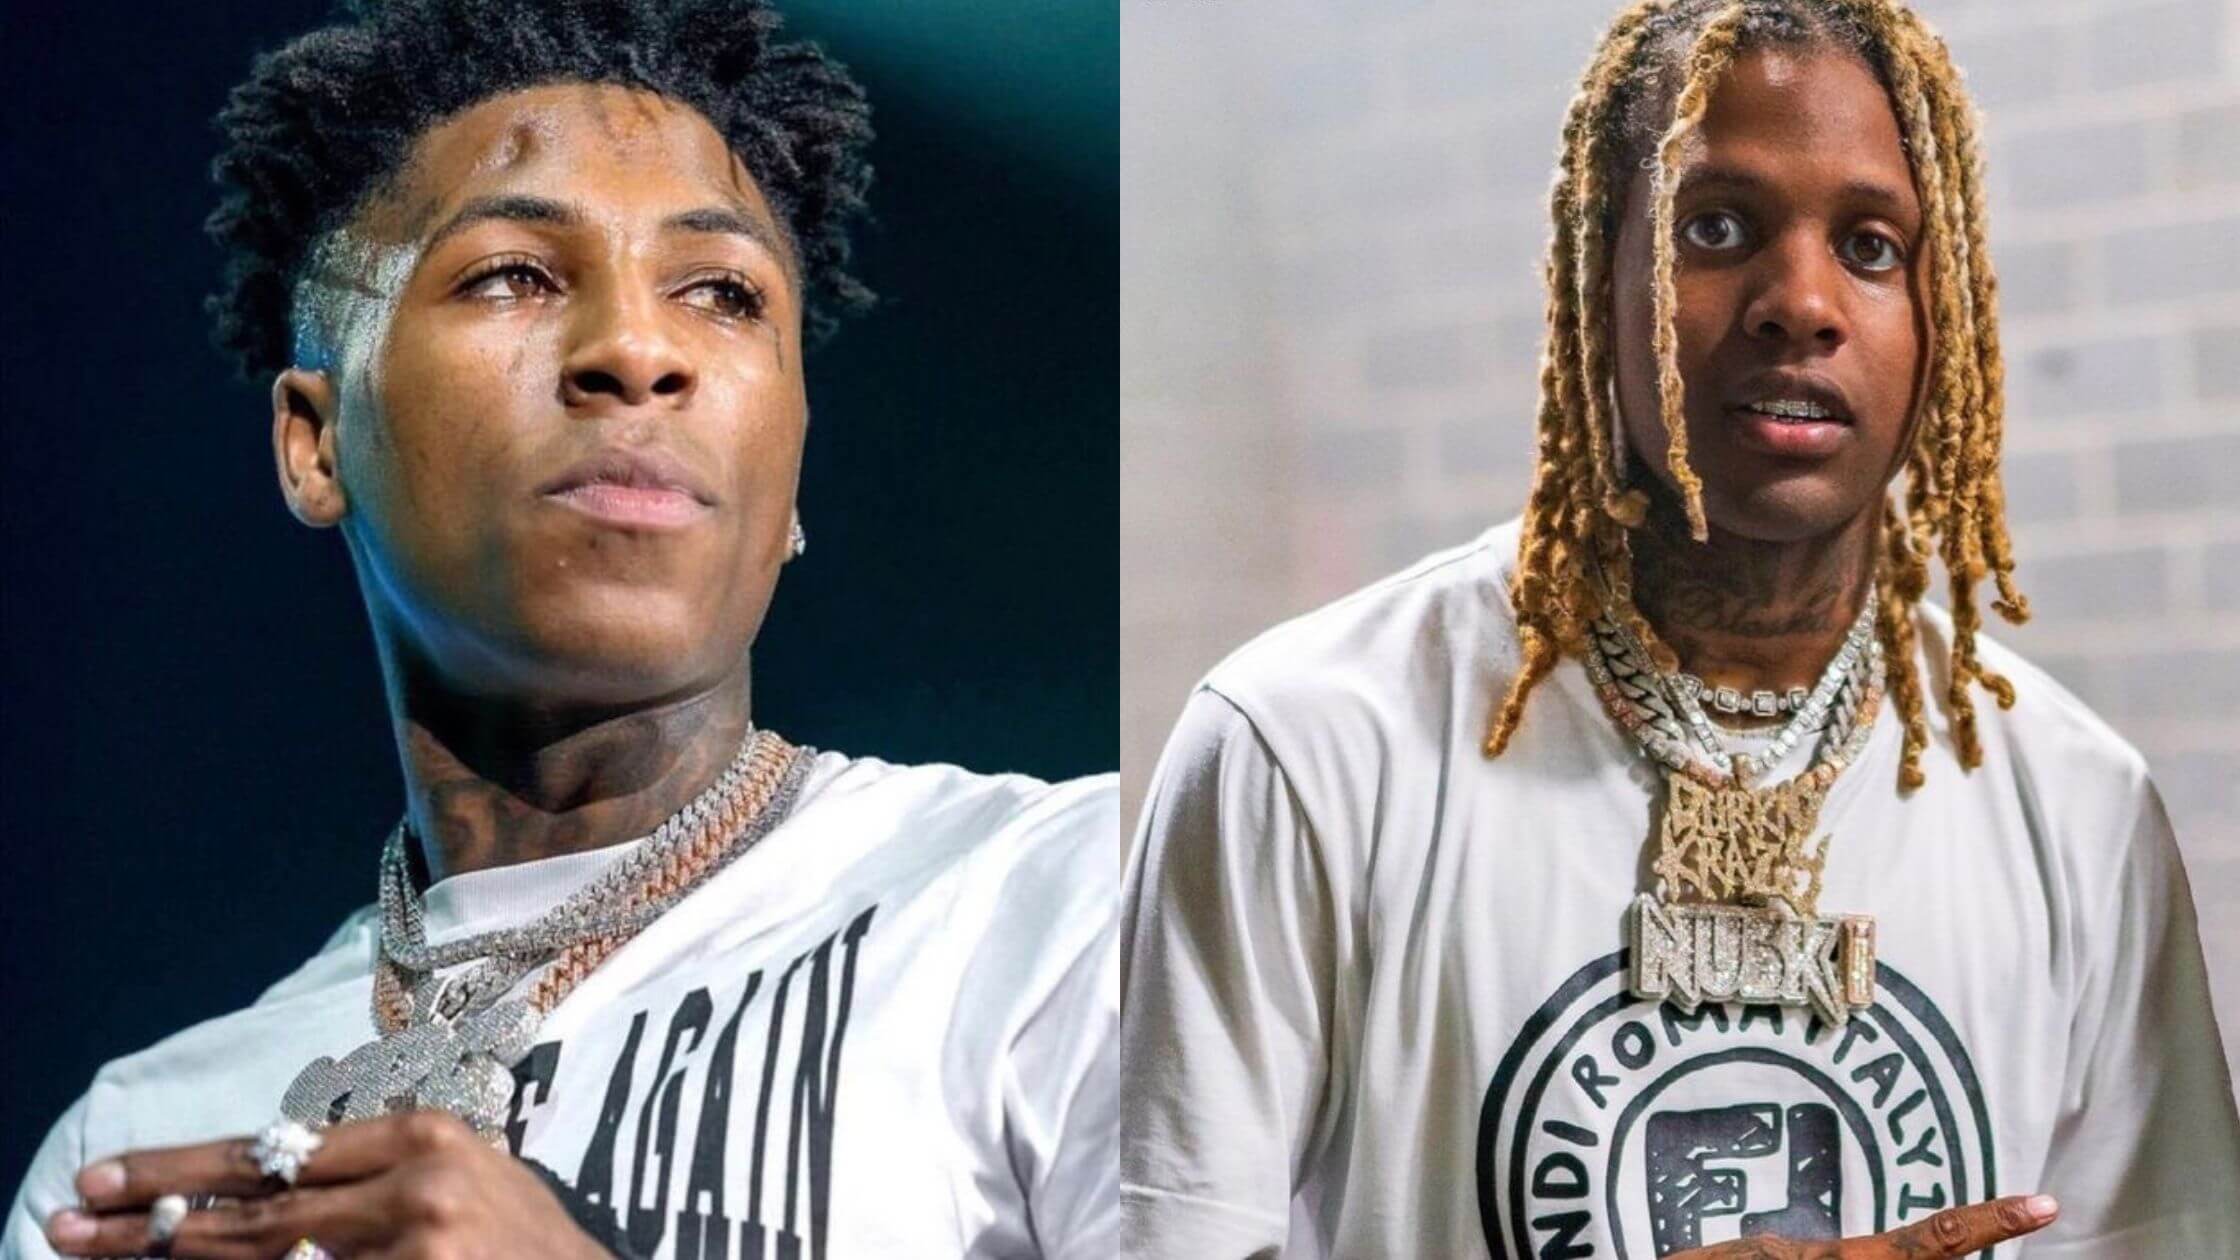 Nba YoungBoy and Lil Durk beef